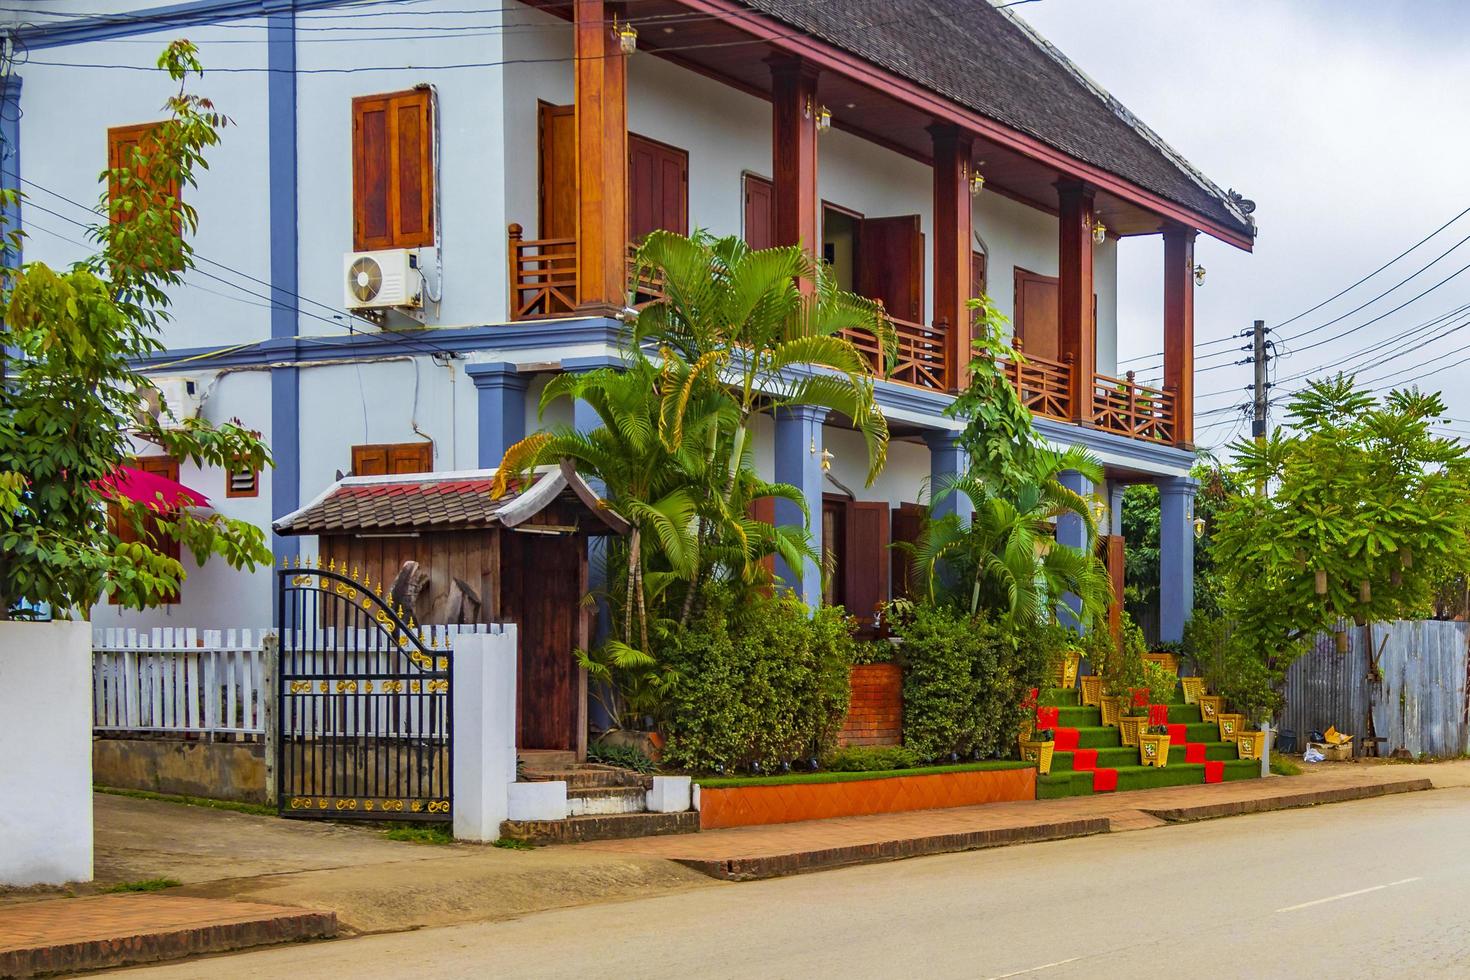 Typical colorful house building in a street Luang Prabang Laos. photo